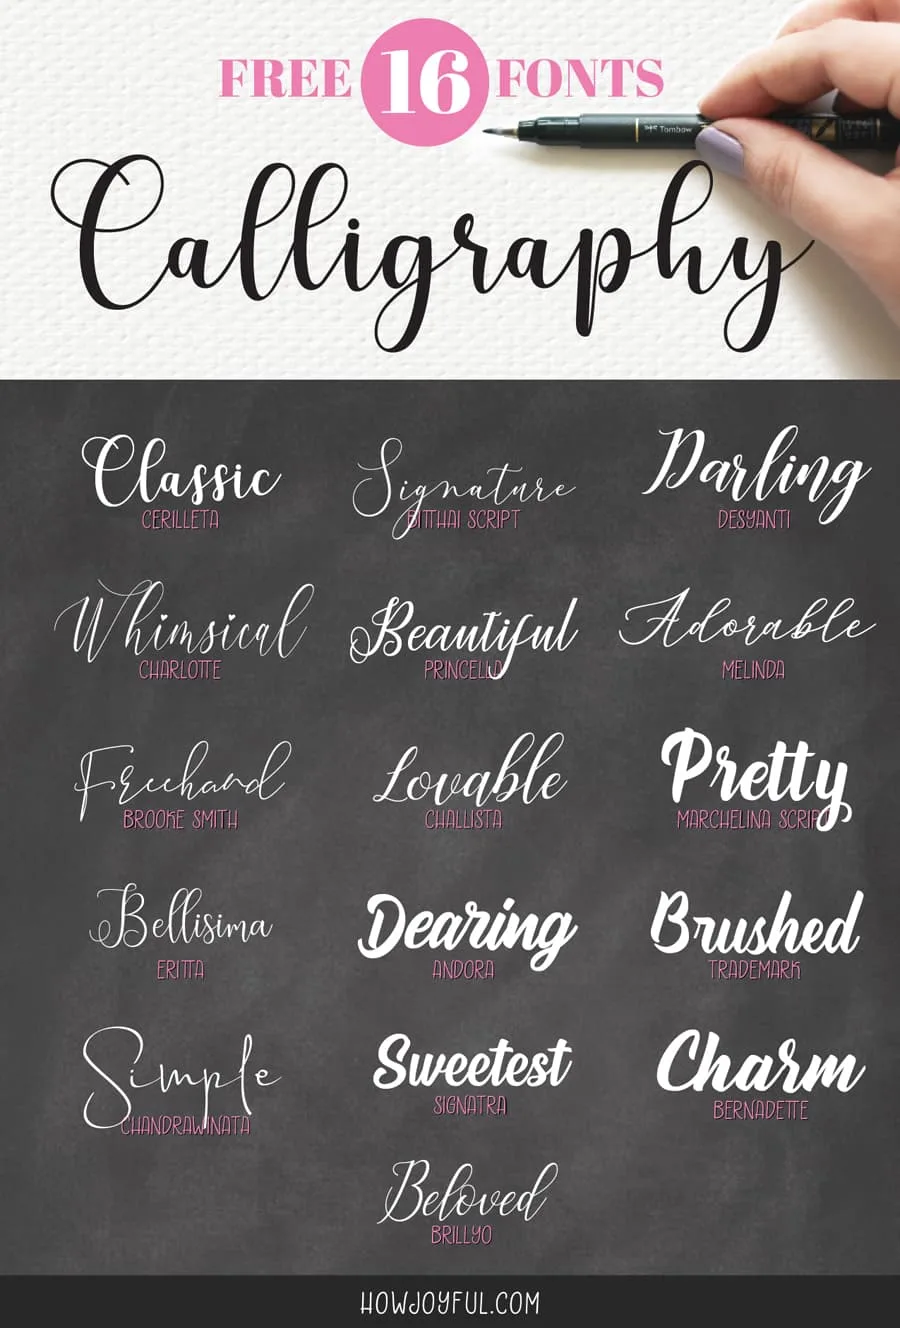 How To Write Calligraphy With A Normal Pen Pdf - How to write russian ...